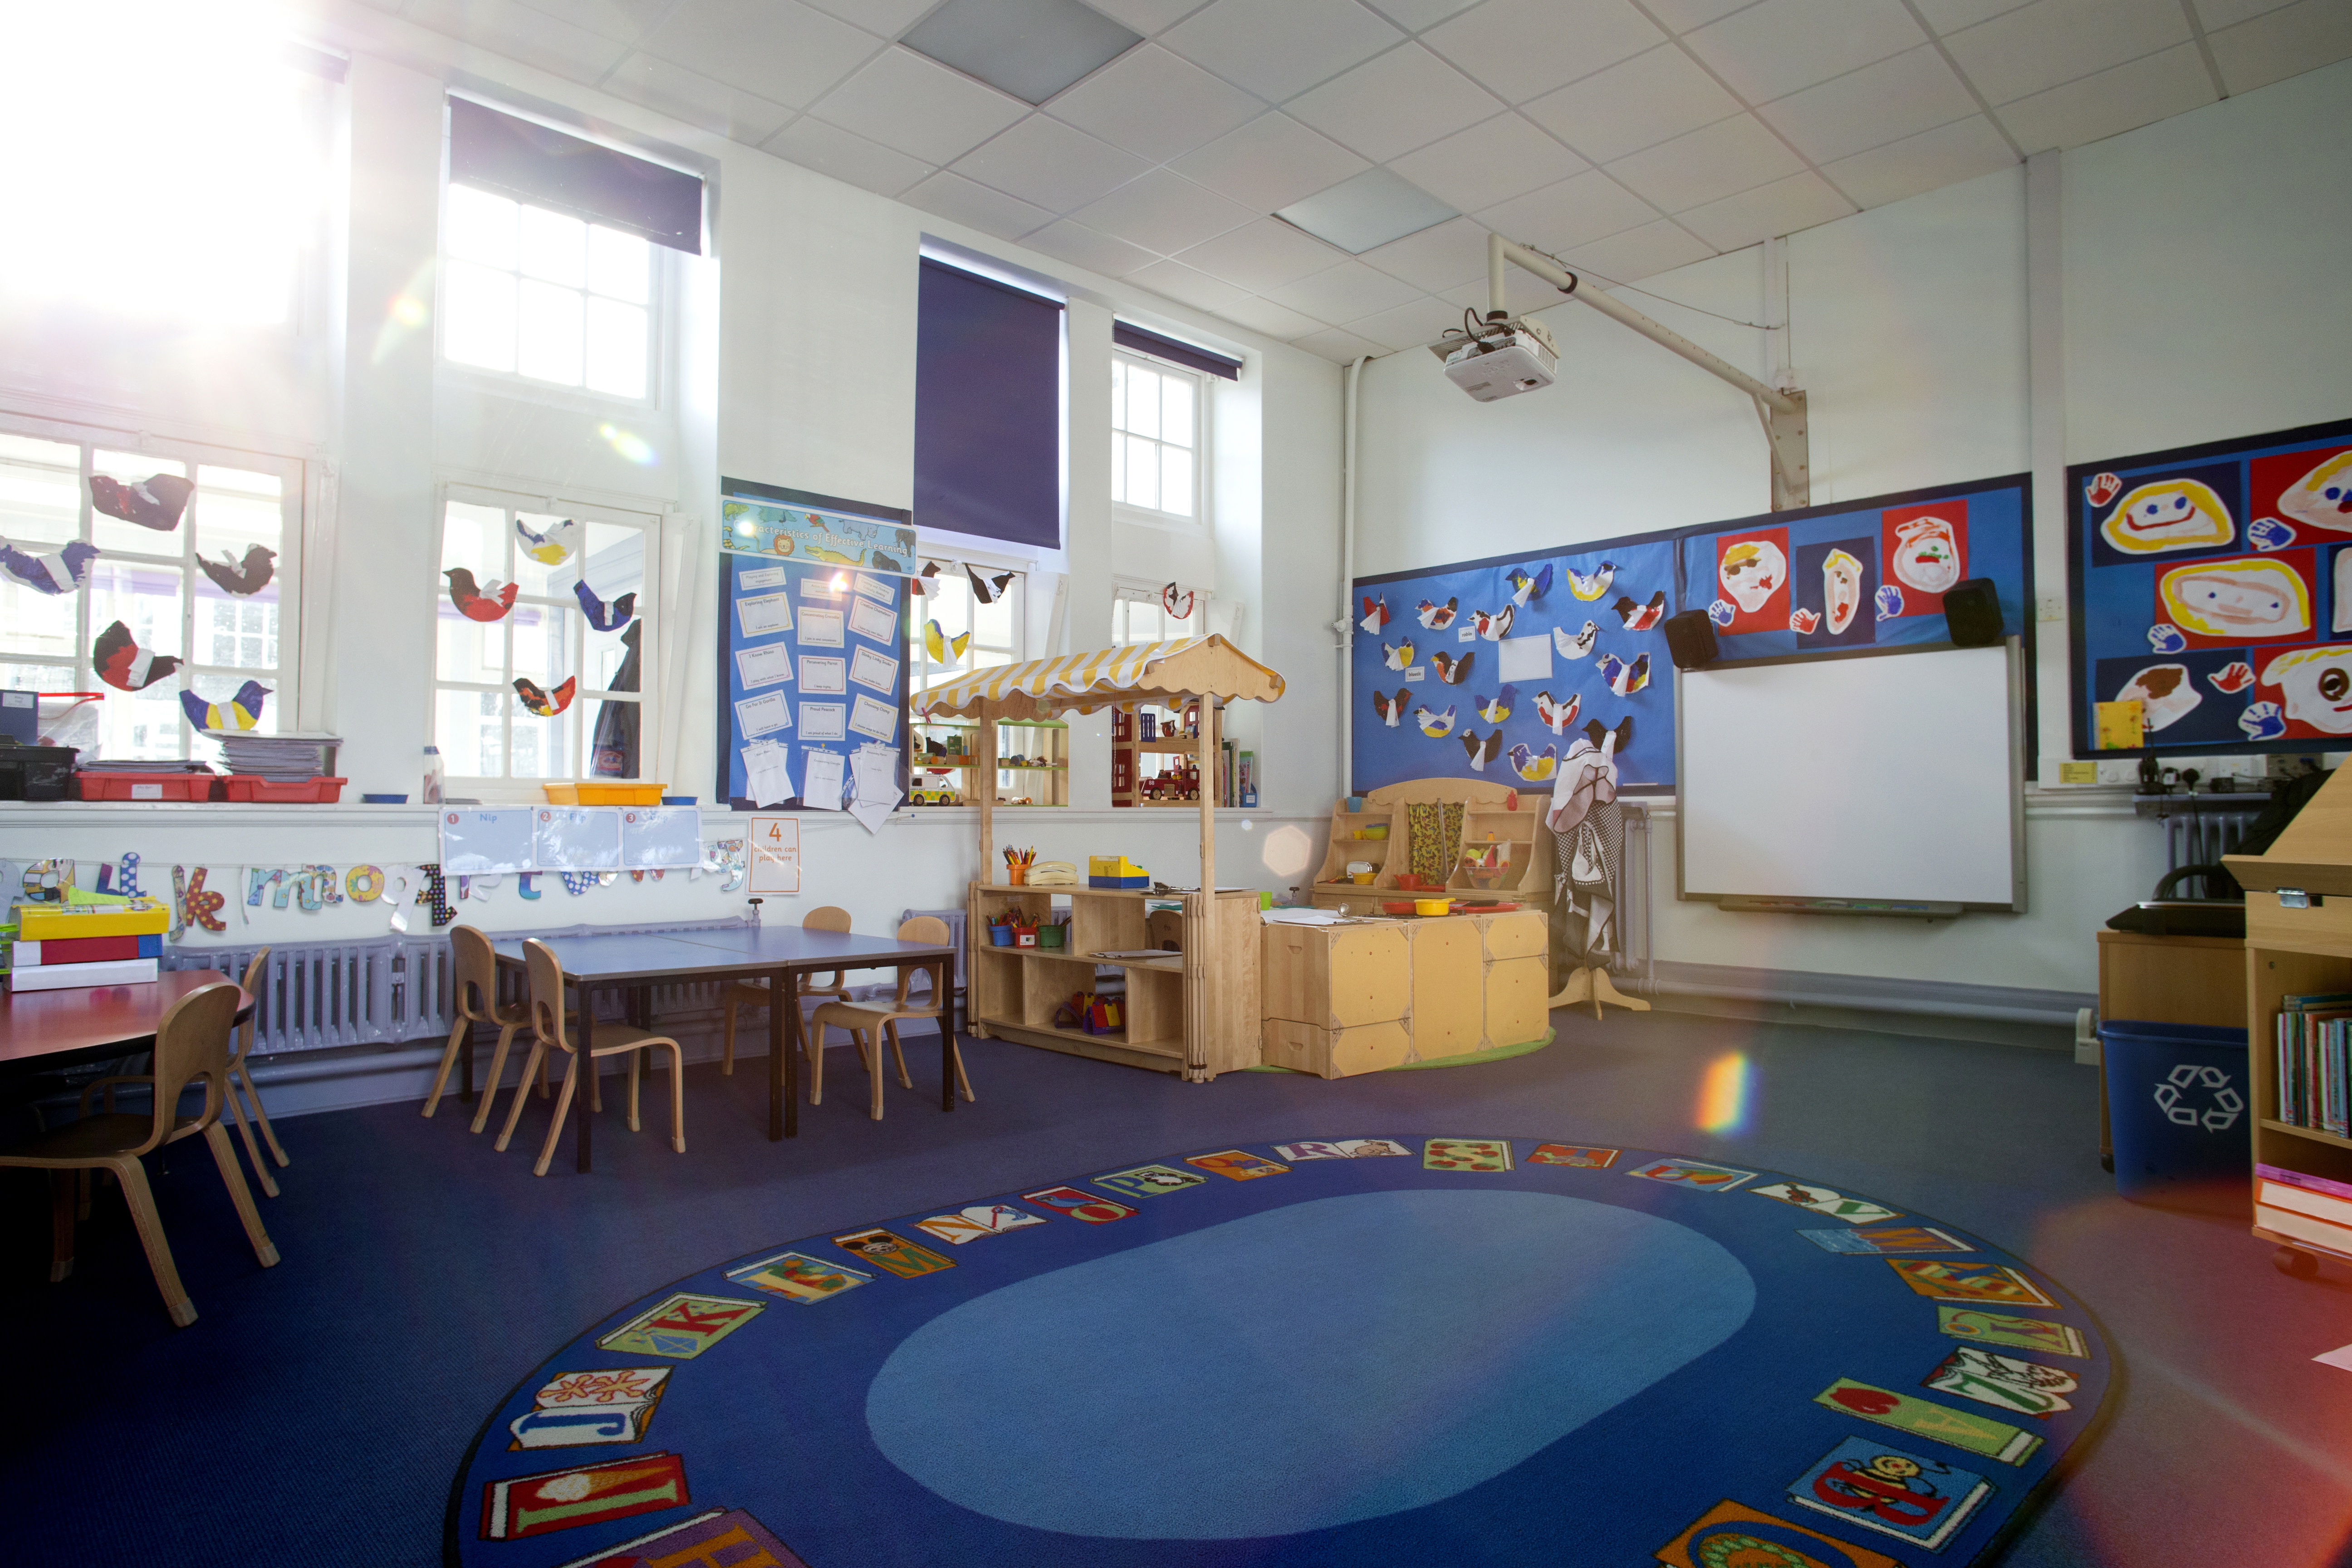 School Flooring Guide: How to Select, Plan & Install